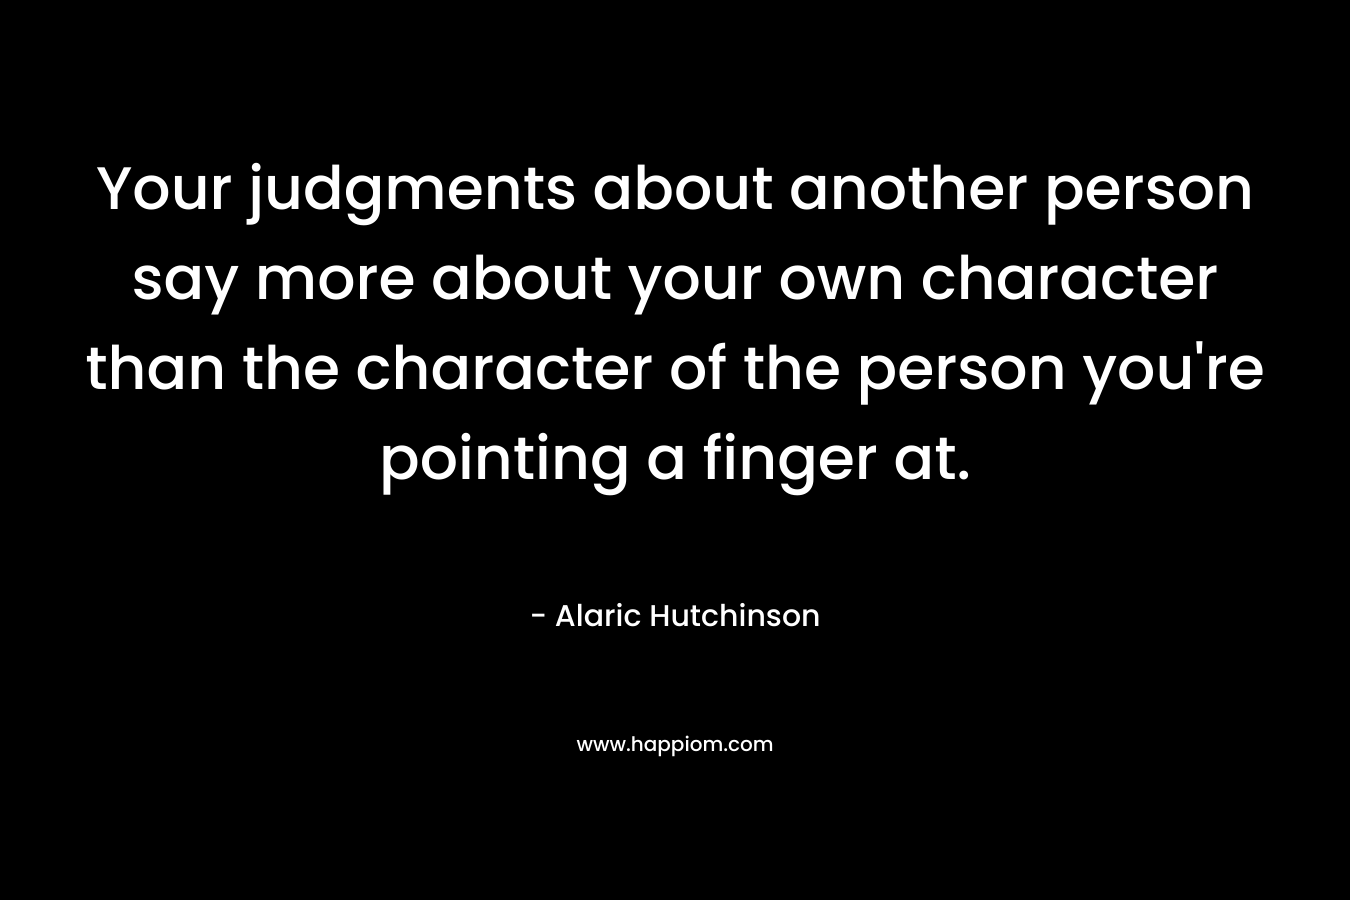 Your judgments about another person say more about your own character than the character of the person you're pointing a finger at.